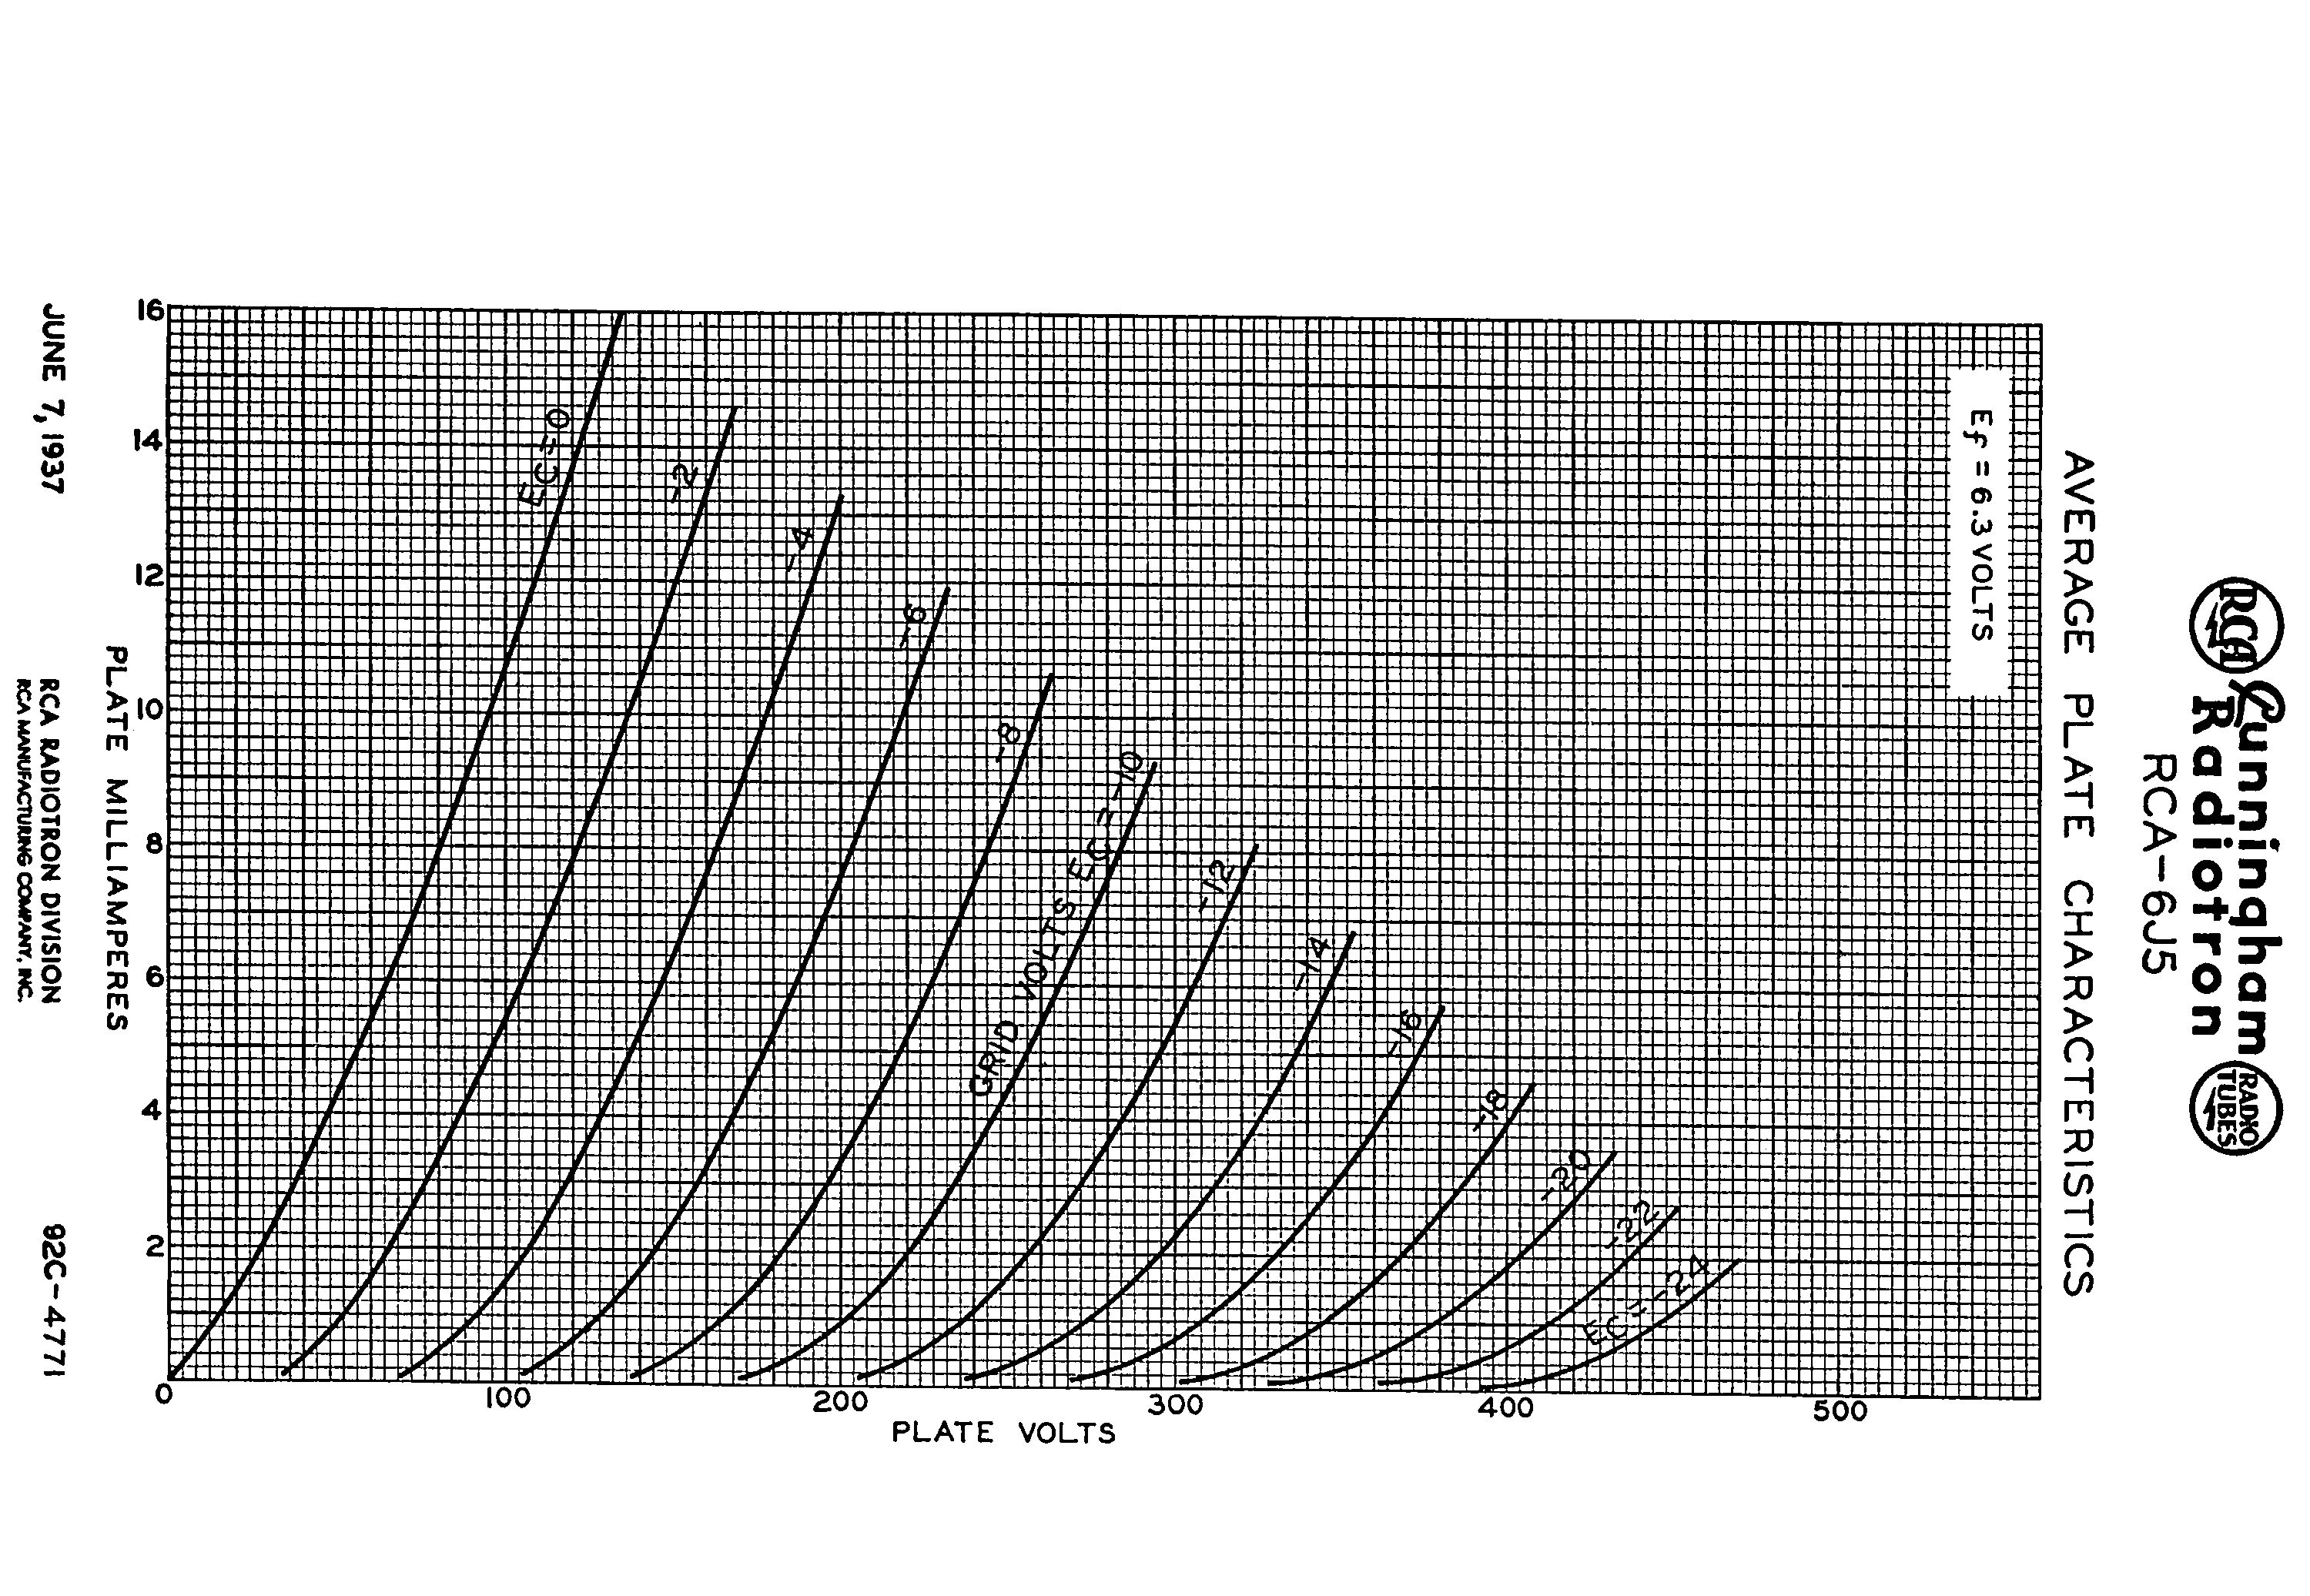 triode characteristic curves